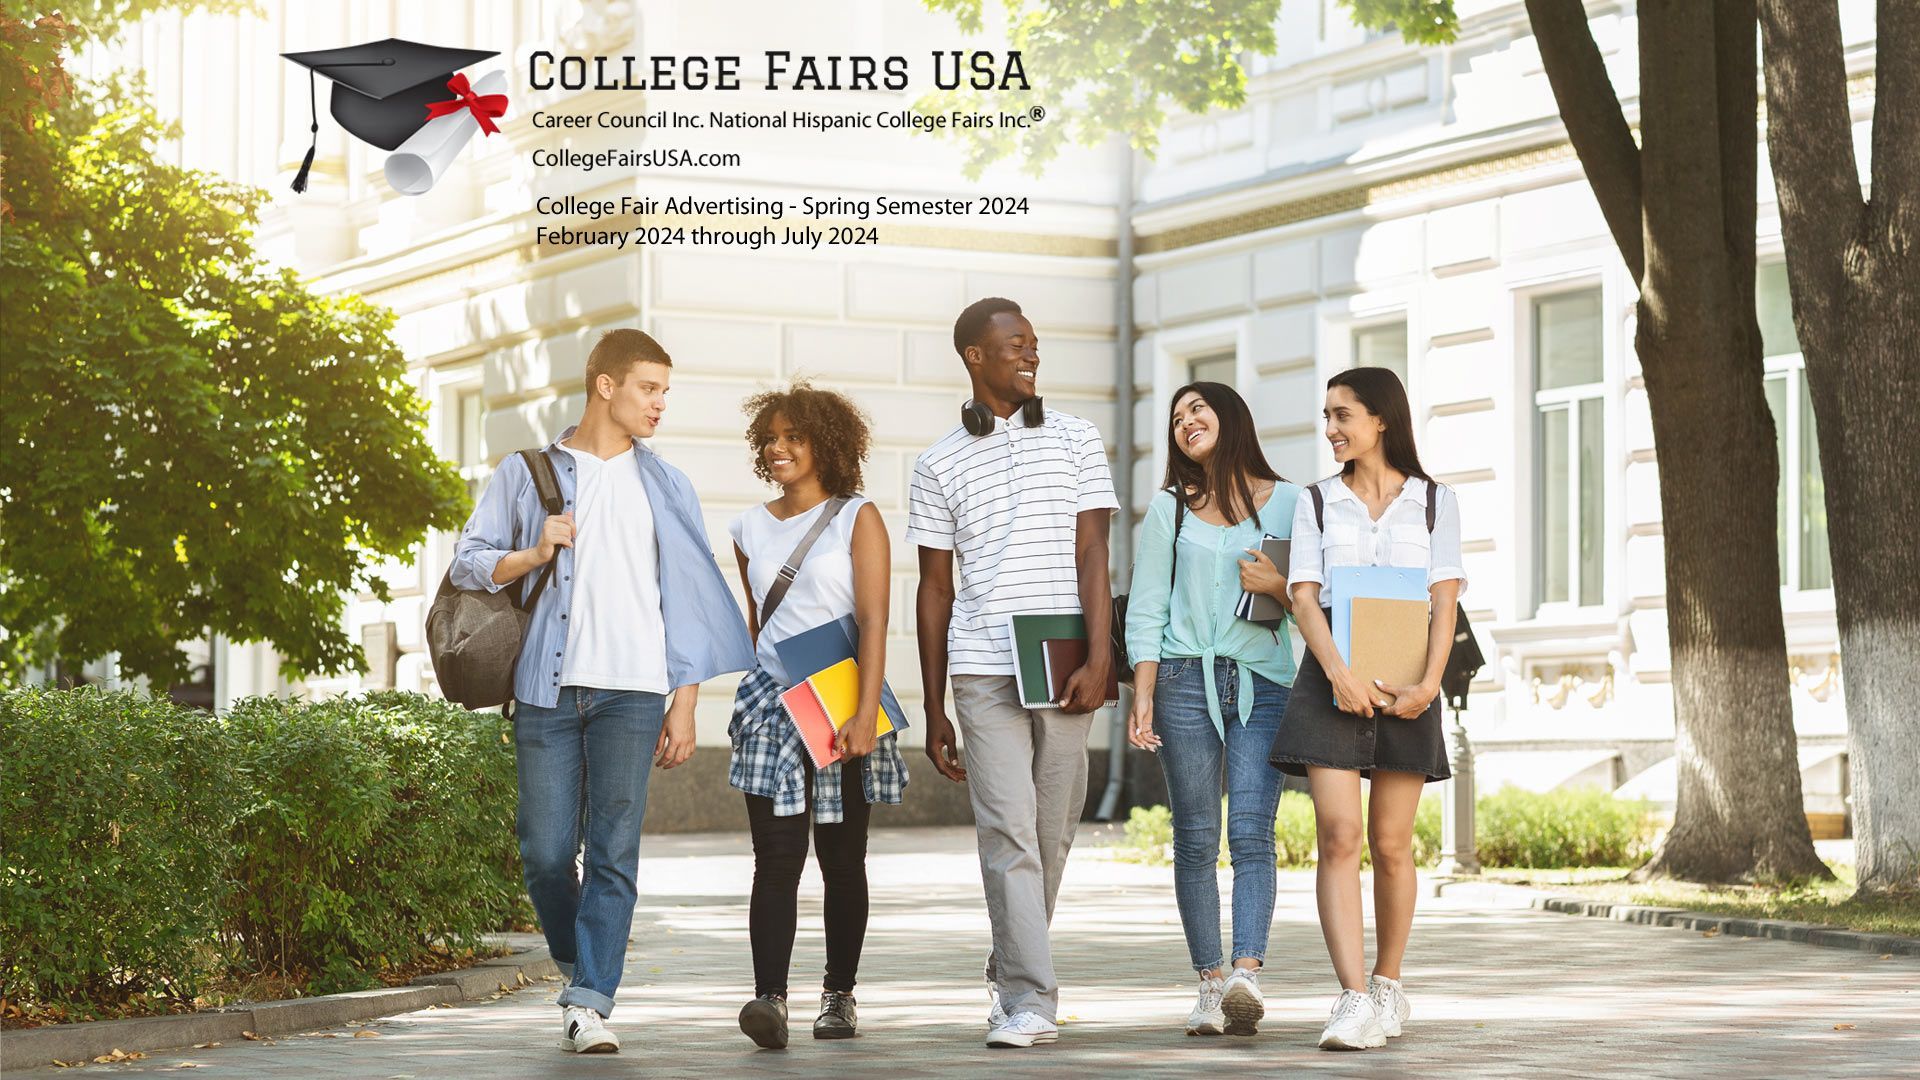 Advertising Opportunities for College Fairs USA